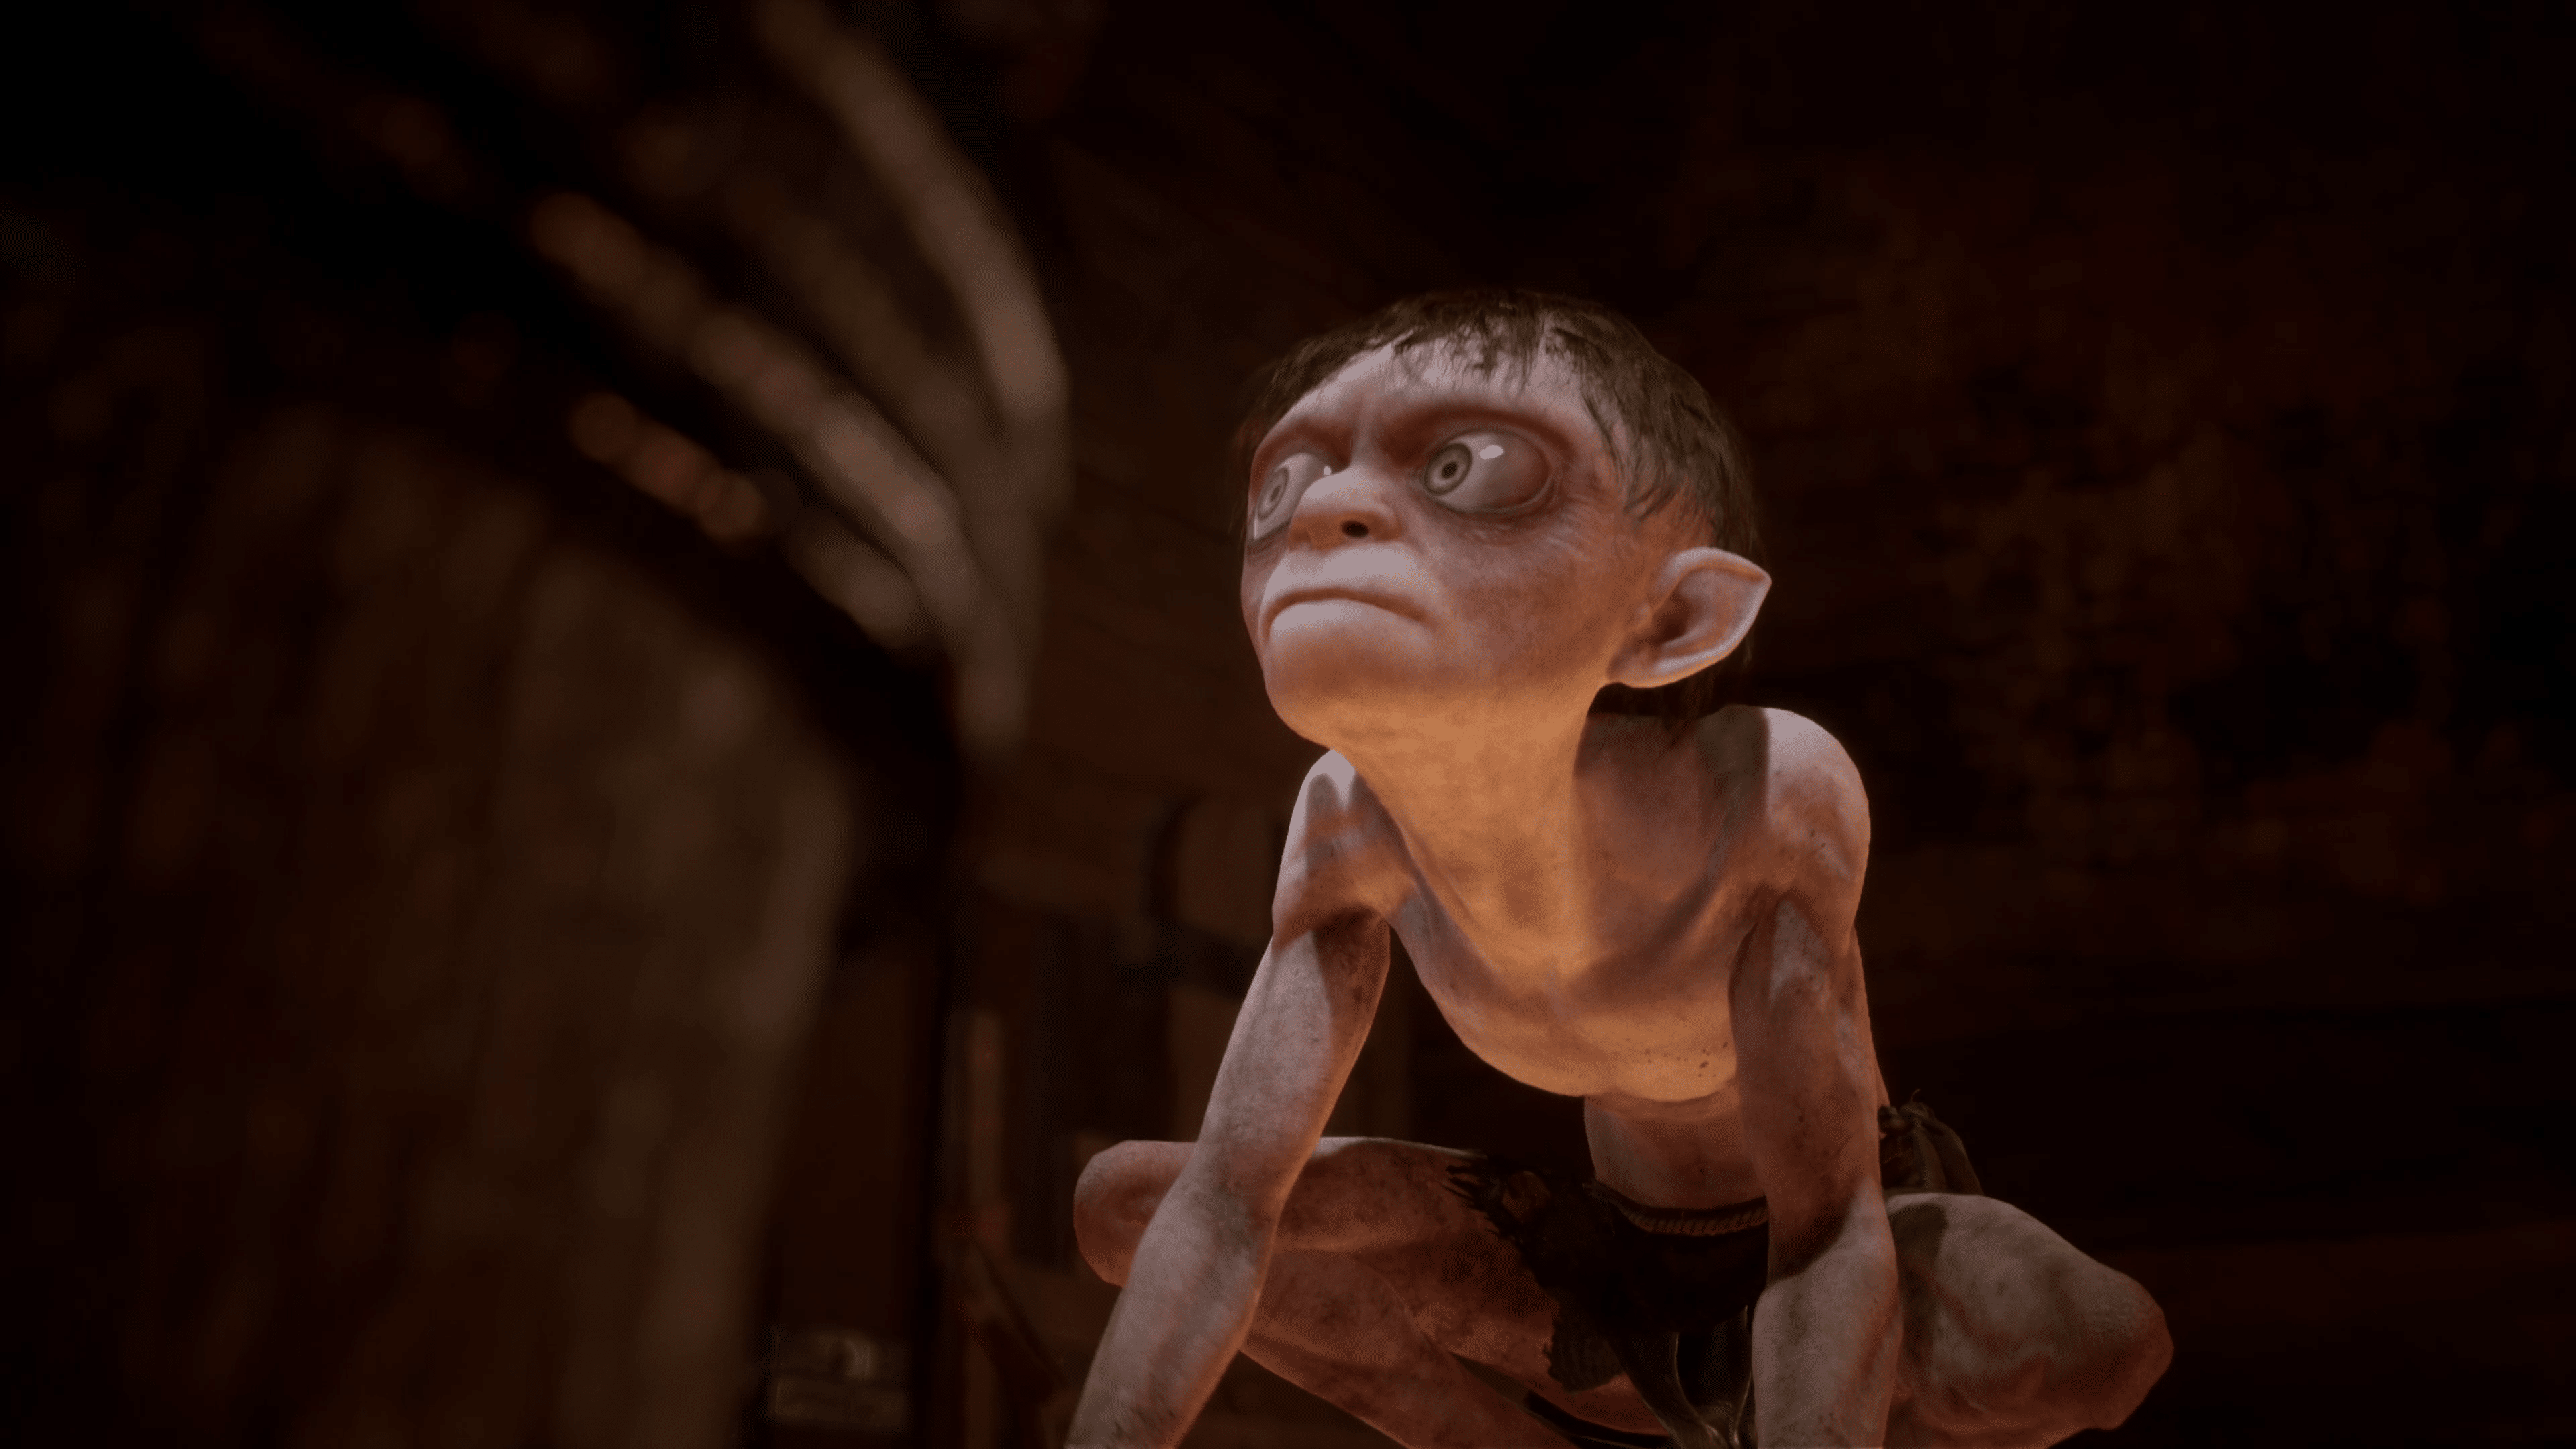 Stealth action game Lord Of The Rings: Gollum won't look like the movies